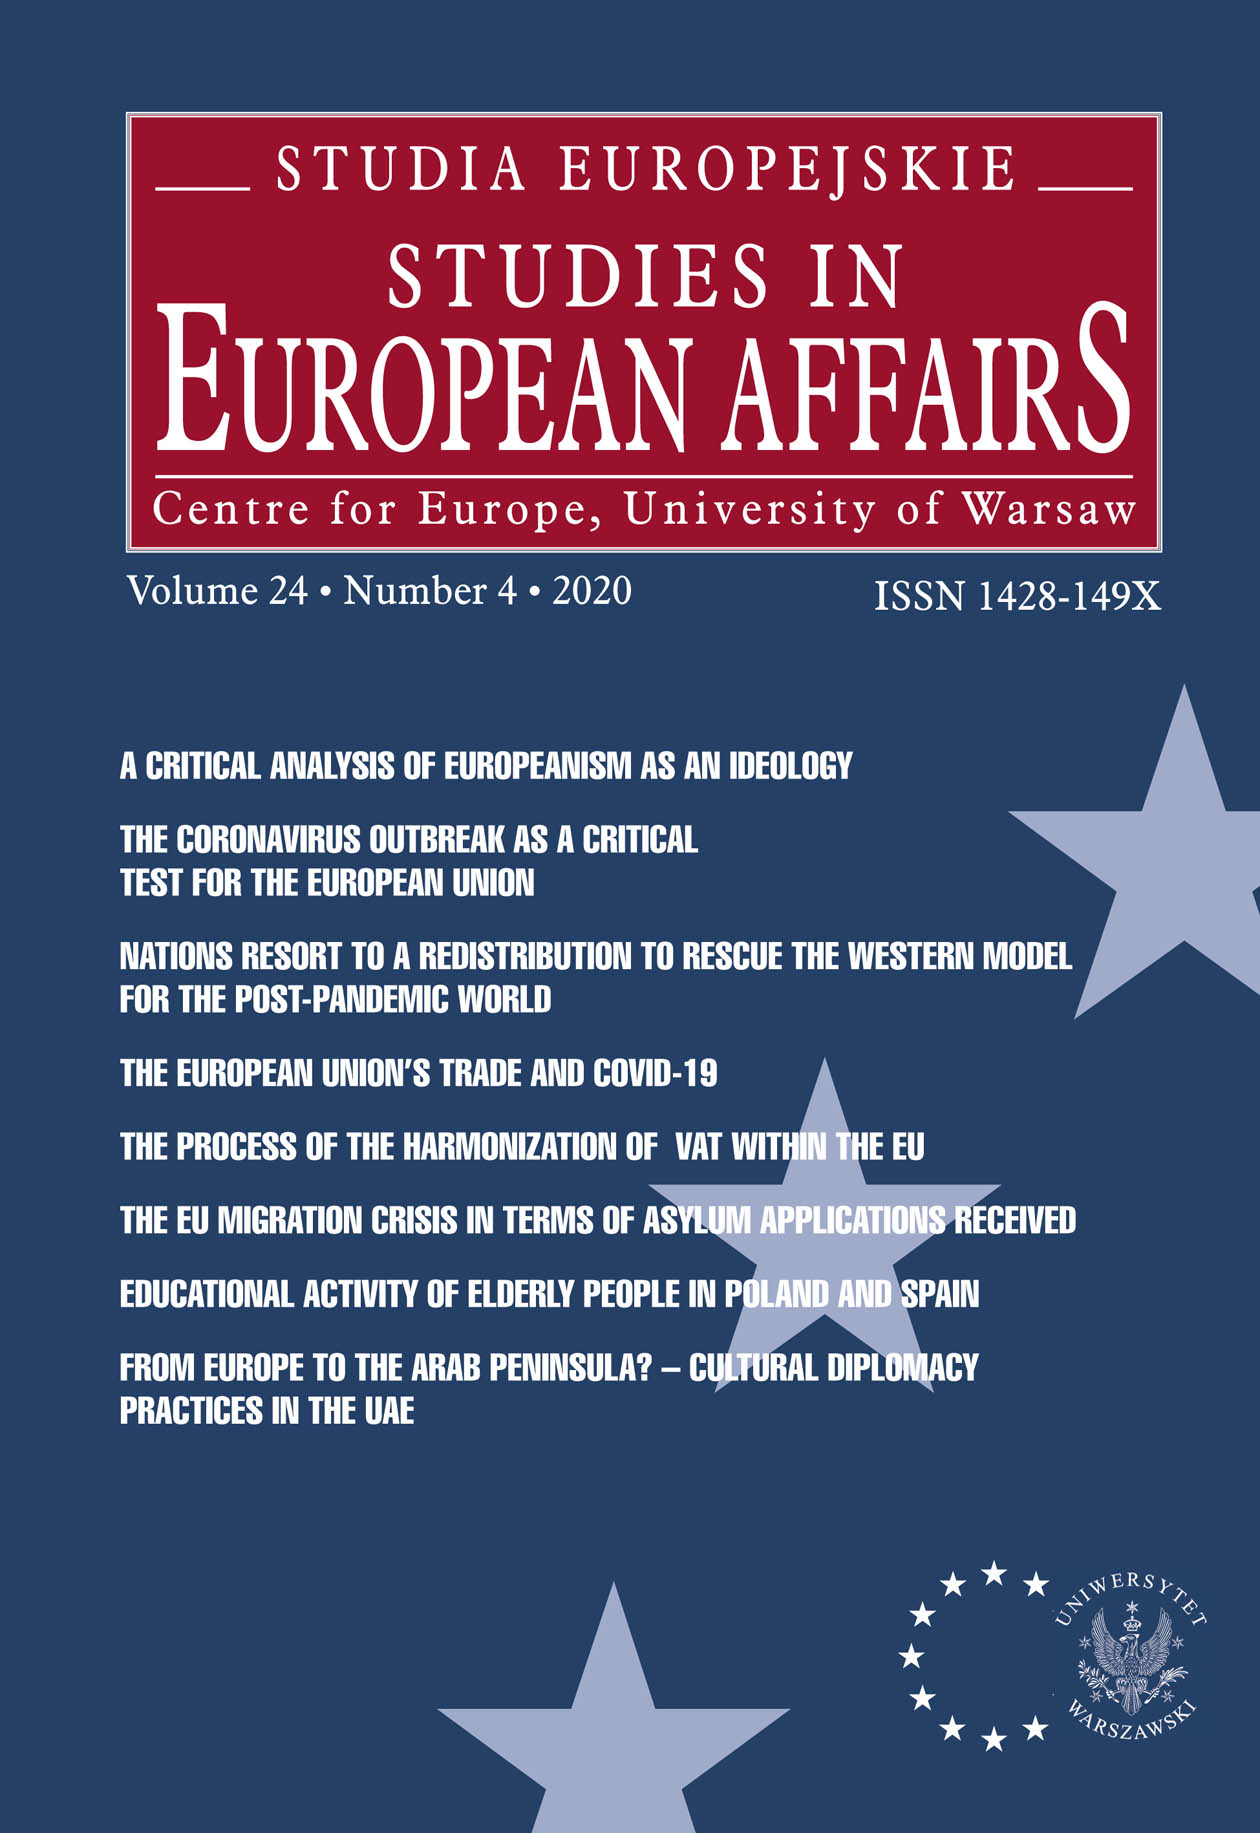 A Critical Analysis of Europeanism as an Ideology. Its Preconditions and Tenets